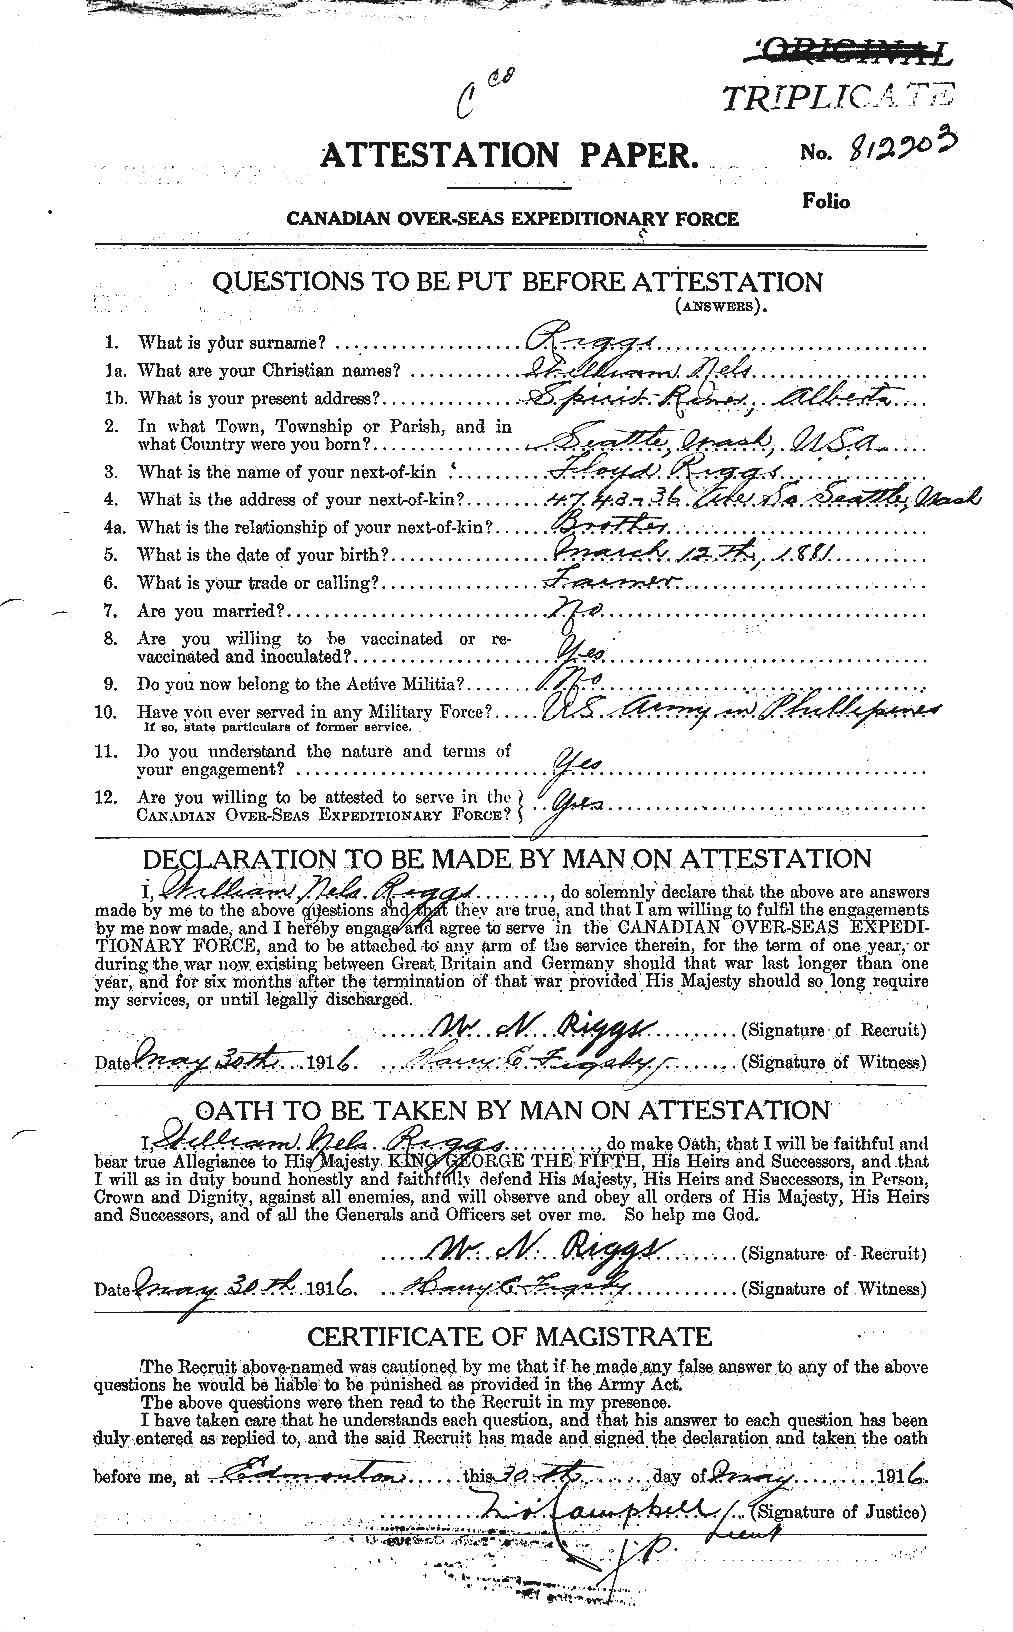 Personnel Records of the First World War - CEF 604524a